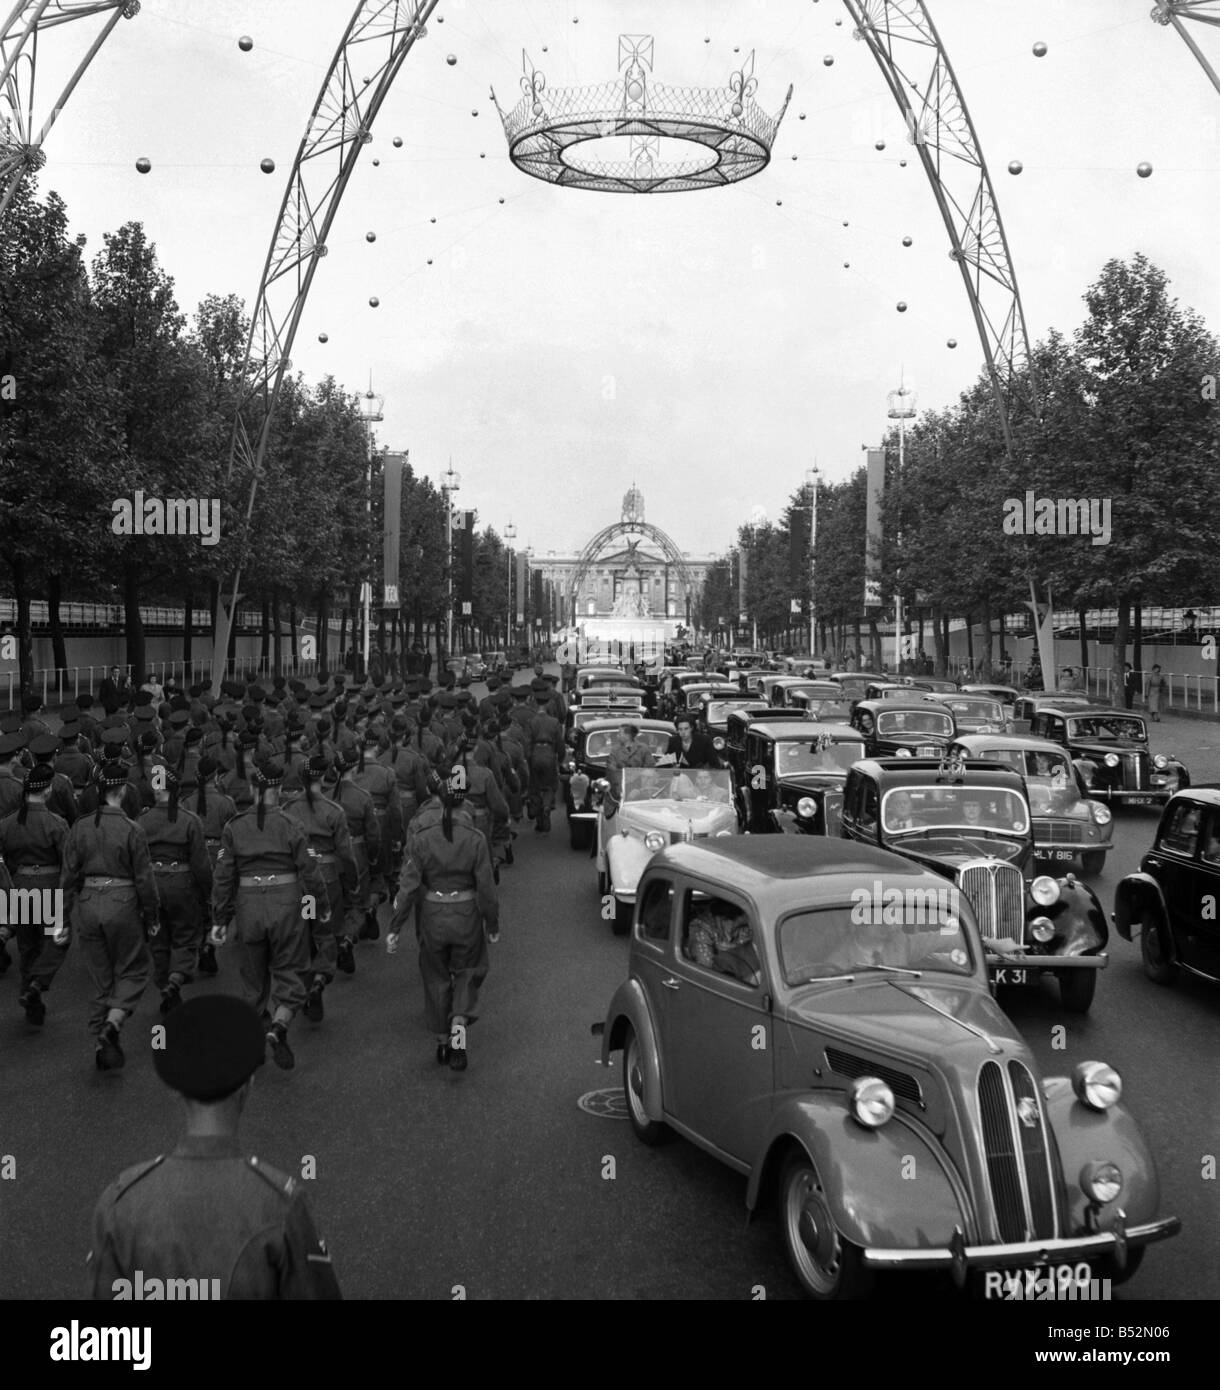 Coronation rehearsal 1953. Even at 6 am the mall was choked with private cars, edging forward bumper to bumper. Occasional squards block along the whole procession route. There were very few pedestrians sightseers at this hour. June 1953 D2876 Stock Photo